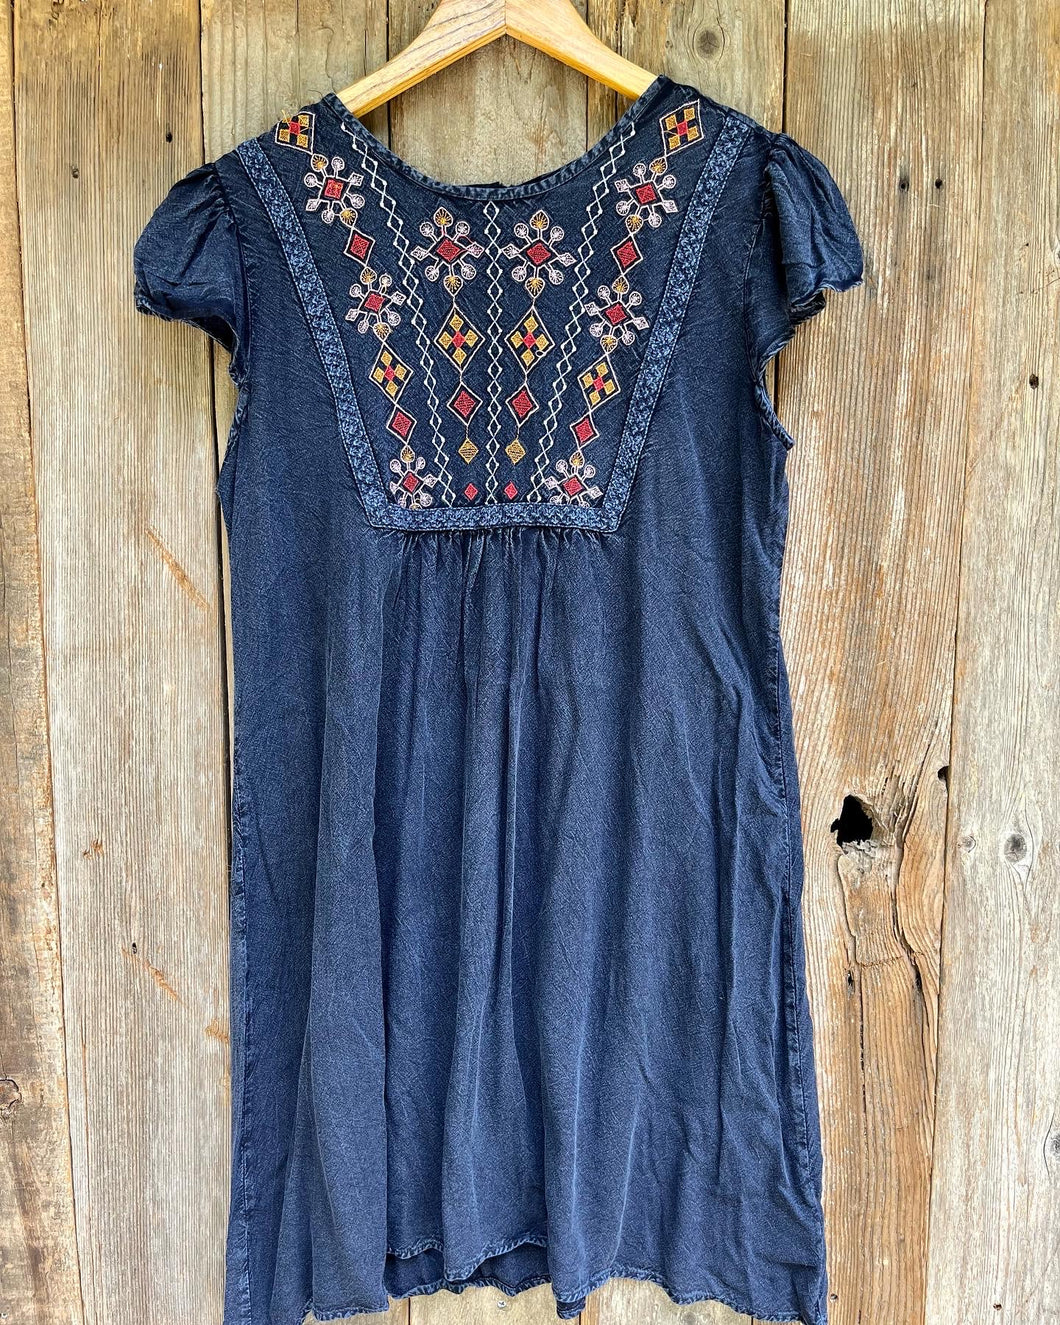 Knit embroidered dress